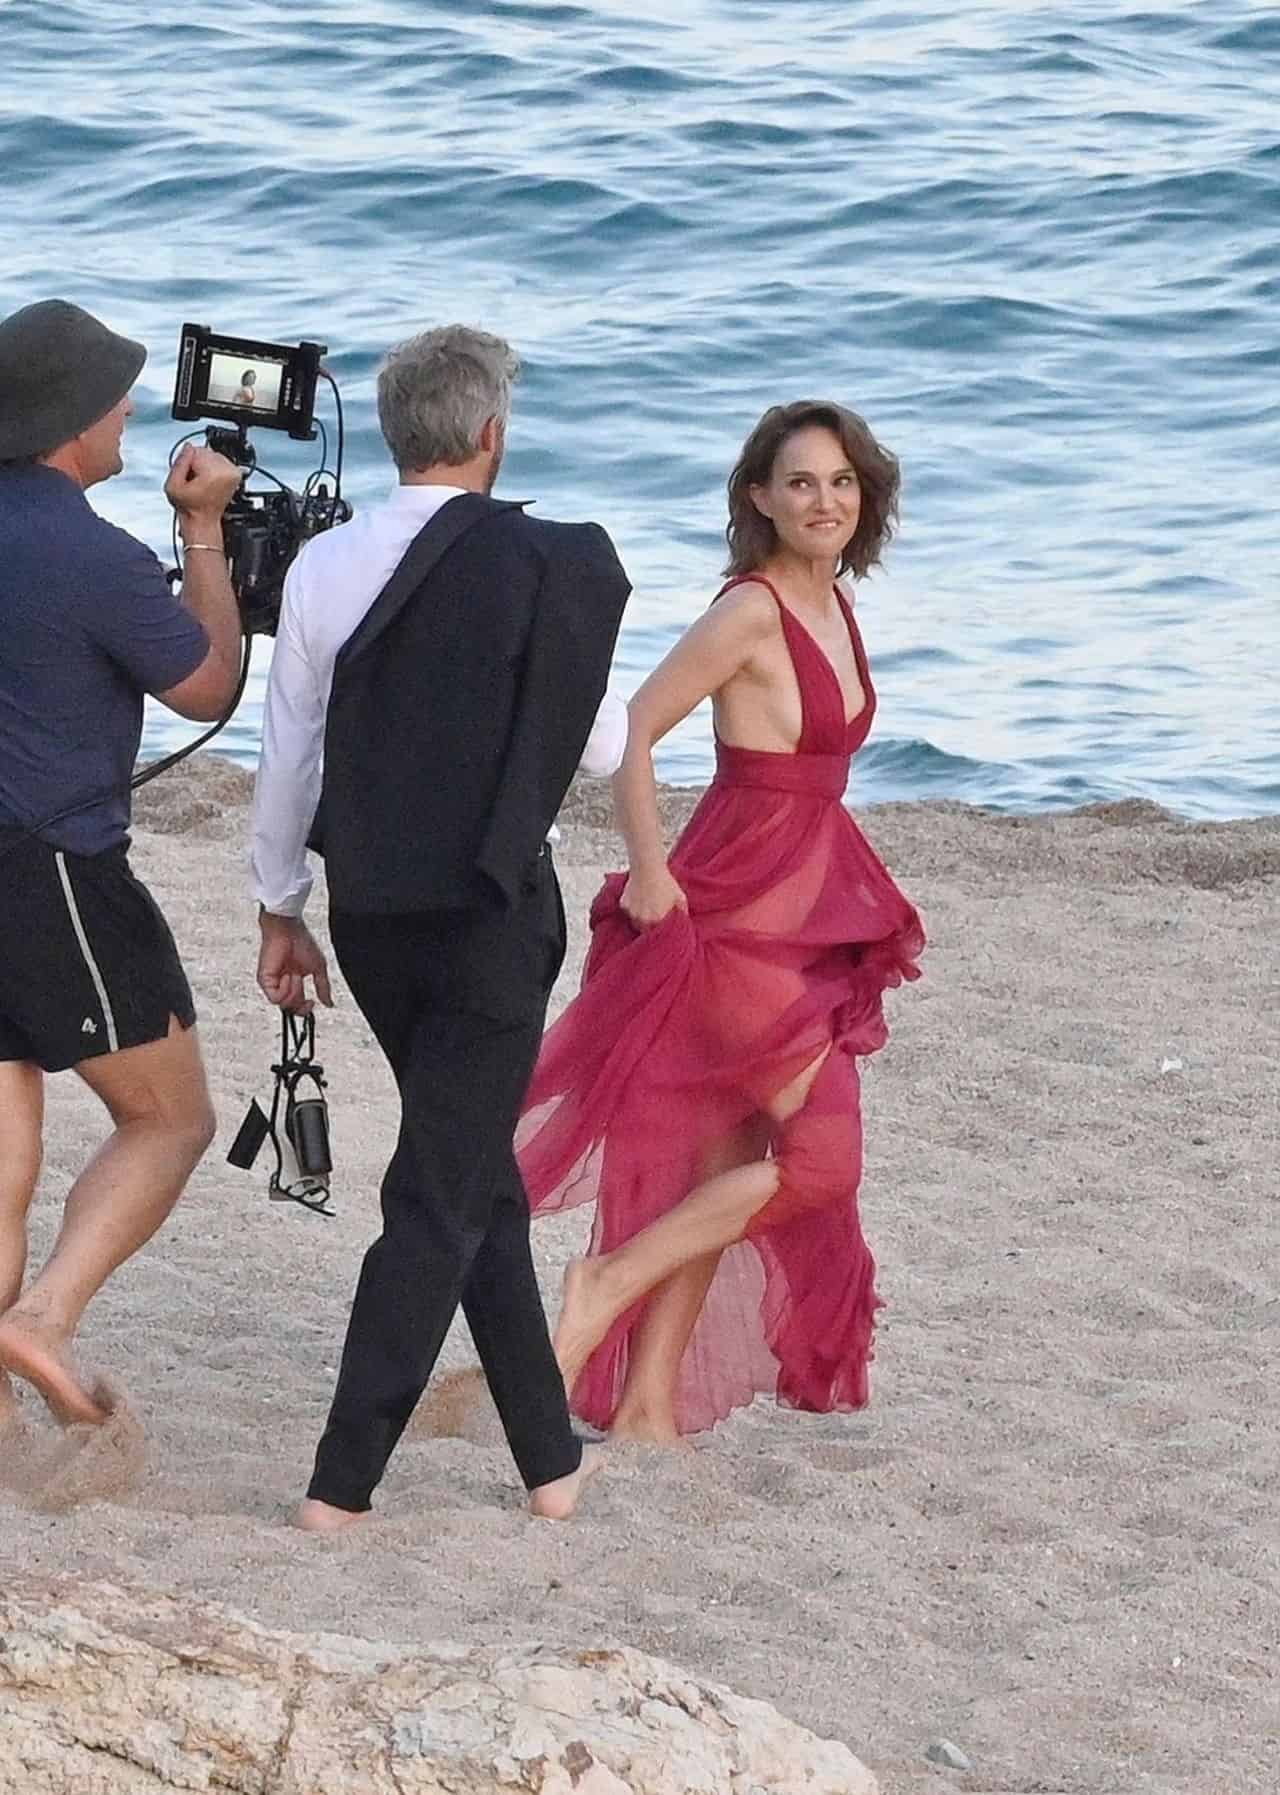 Natalie Portman Stuns in Sheer Red Dress for Dior Campaign Shoot in Spain